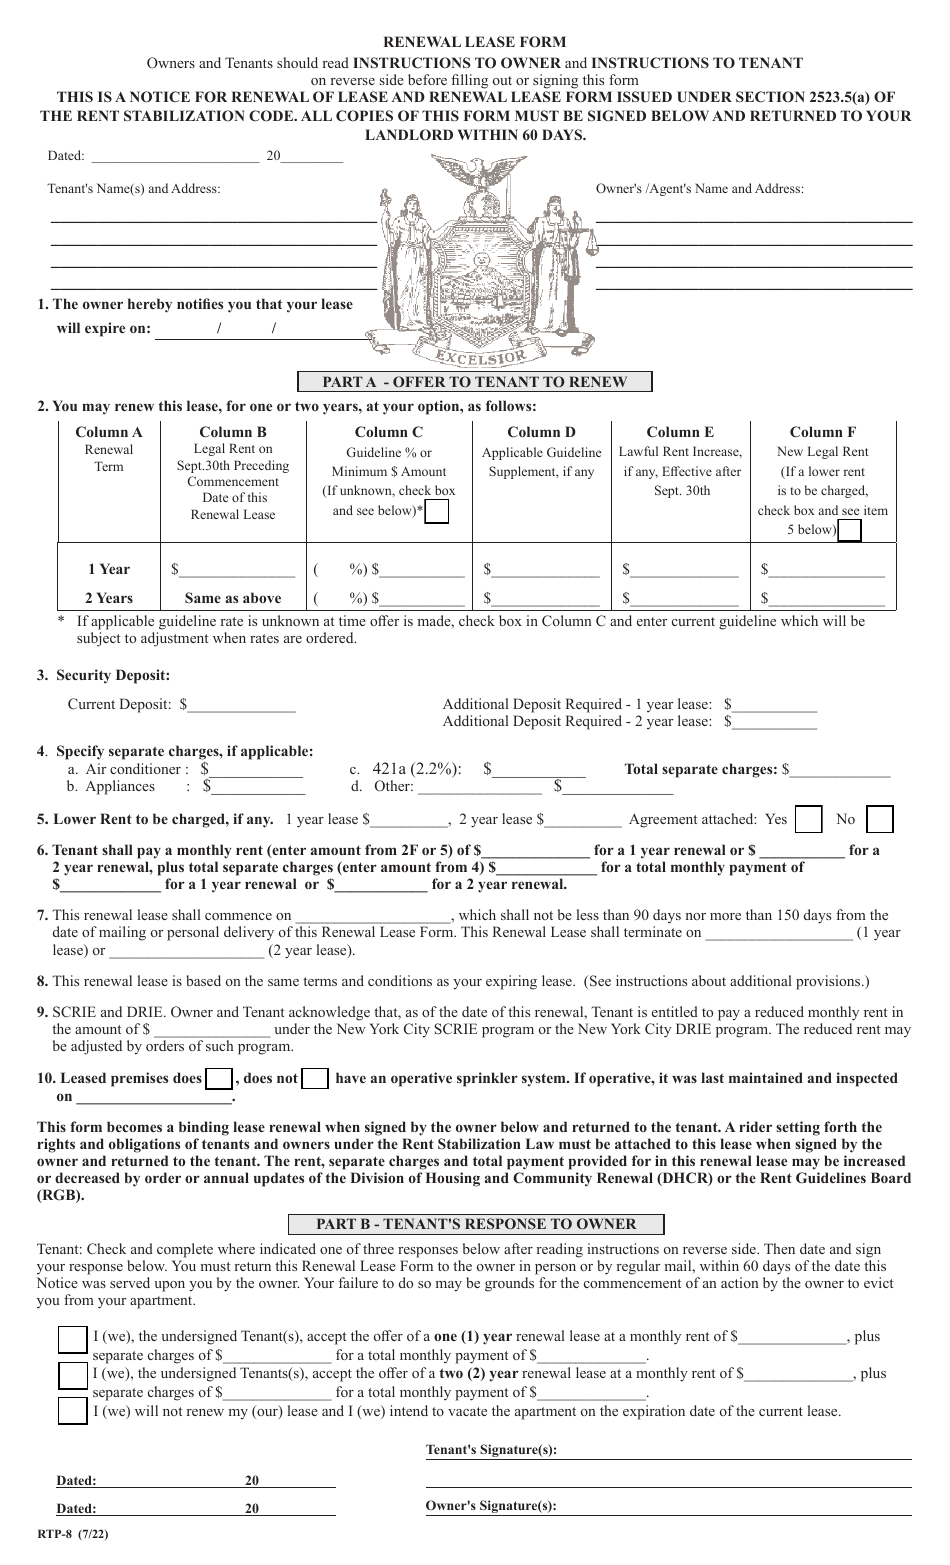 Form RTP-8 Renewal Lease Form - New York, Page 1